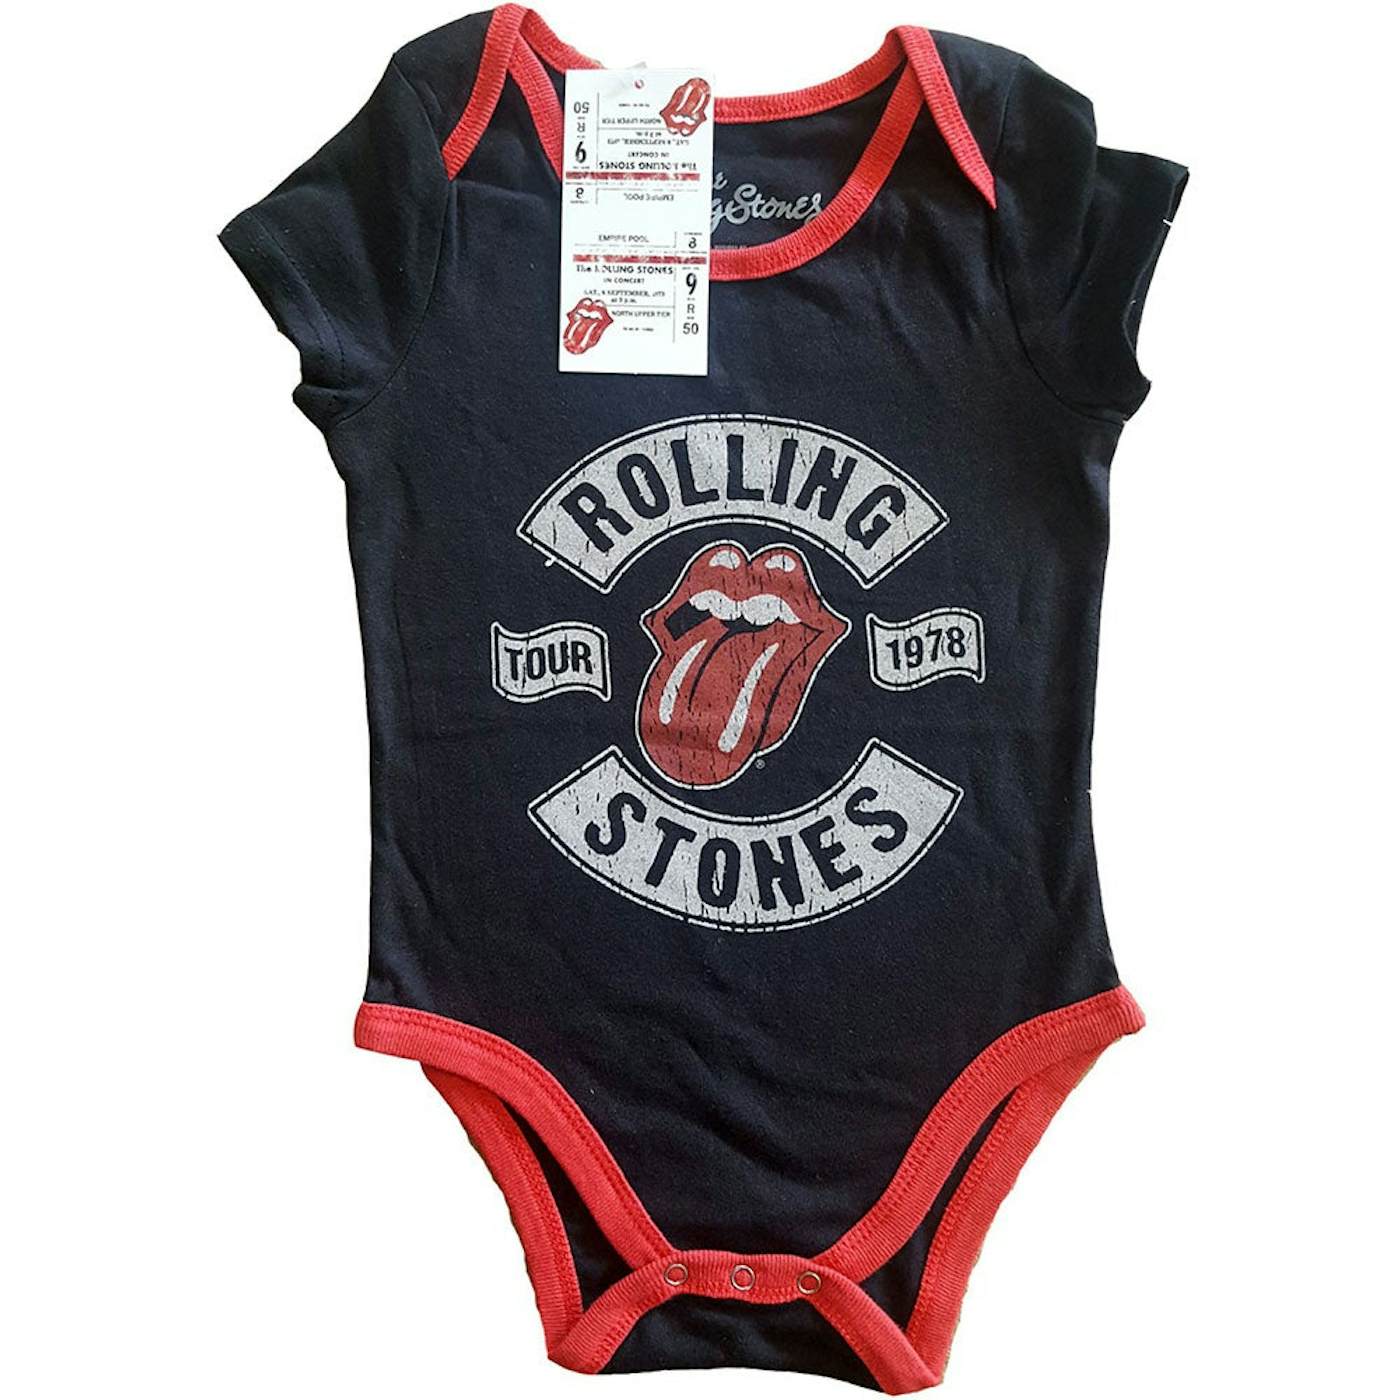 No Filter 2021 Tie Dye T-Shirt – The Rolling Stones